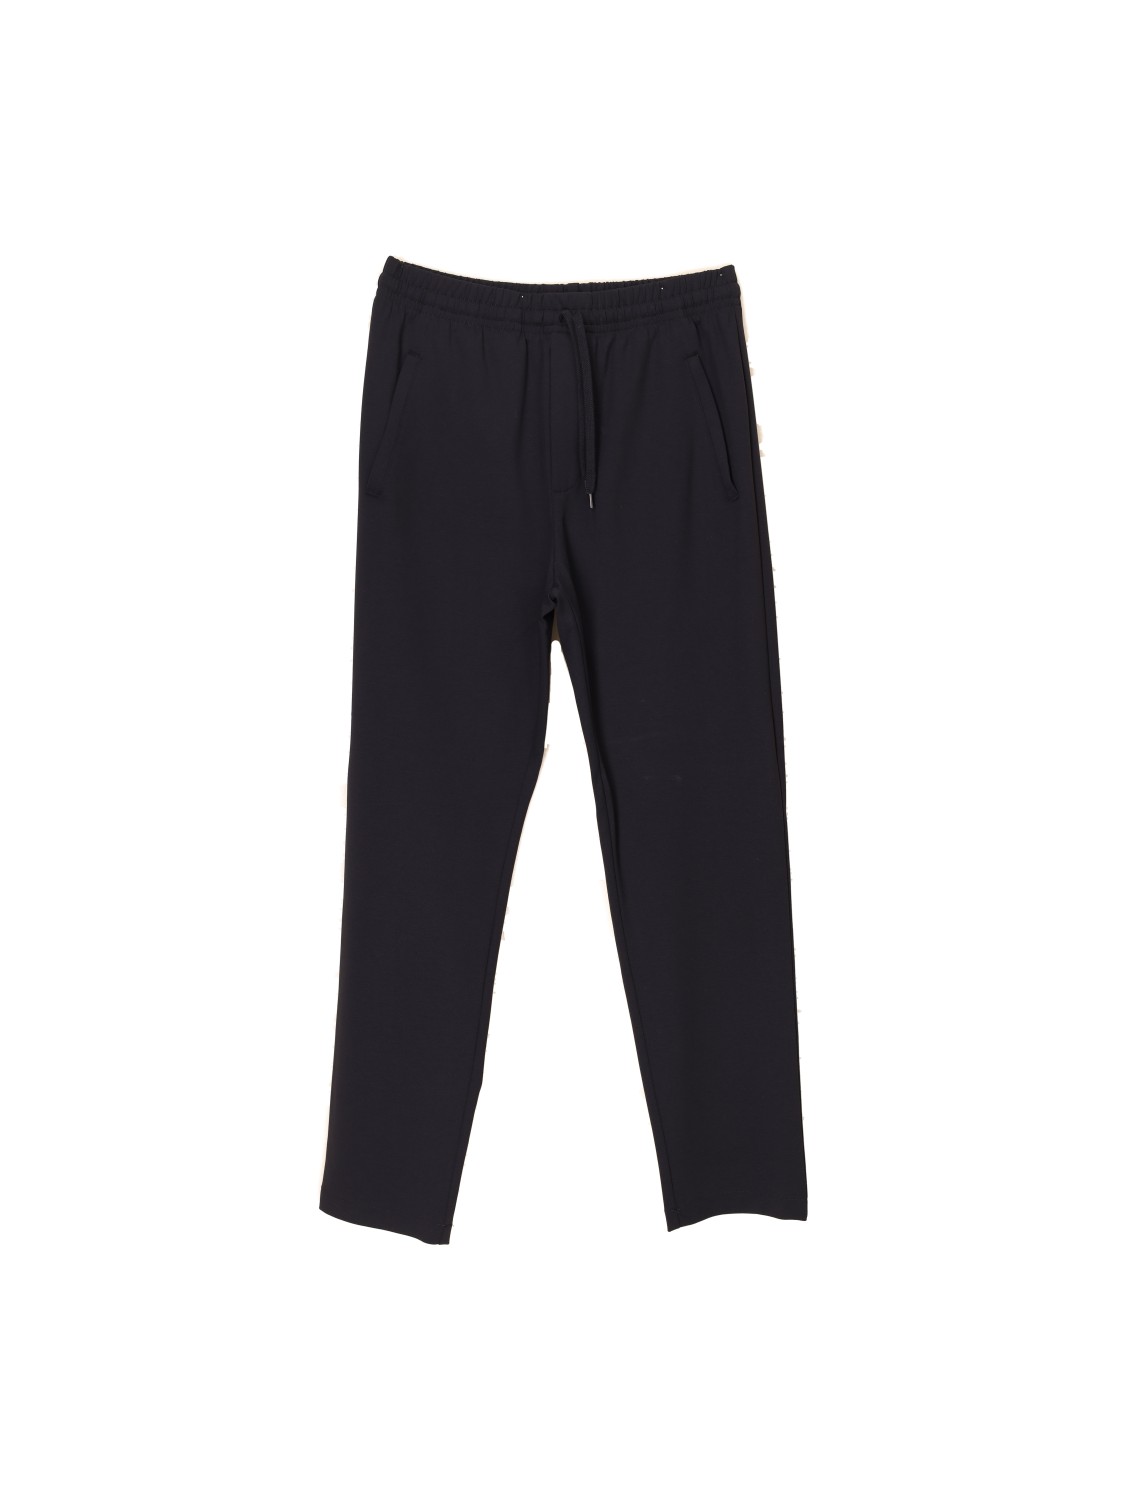 Techno viscose - Stretchy jogging-style trousers  